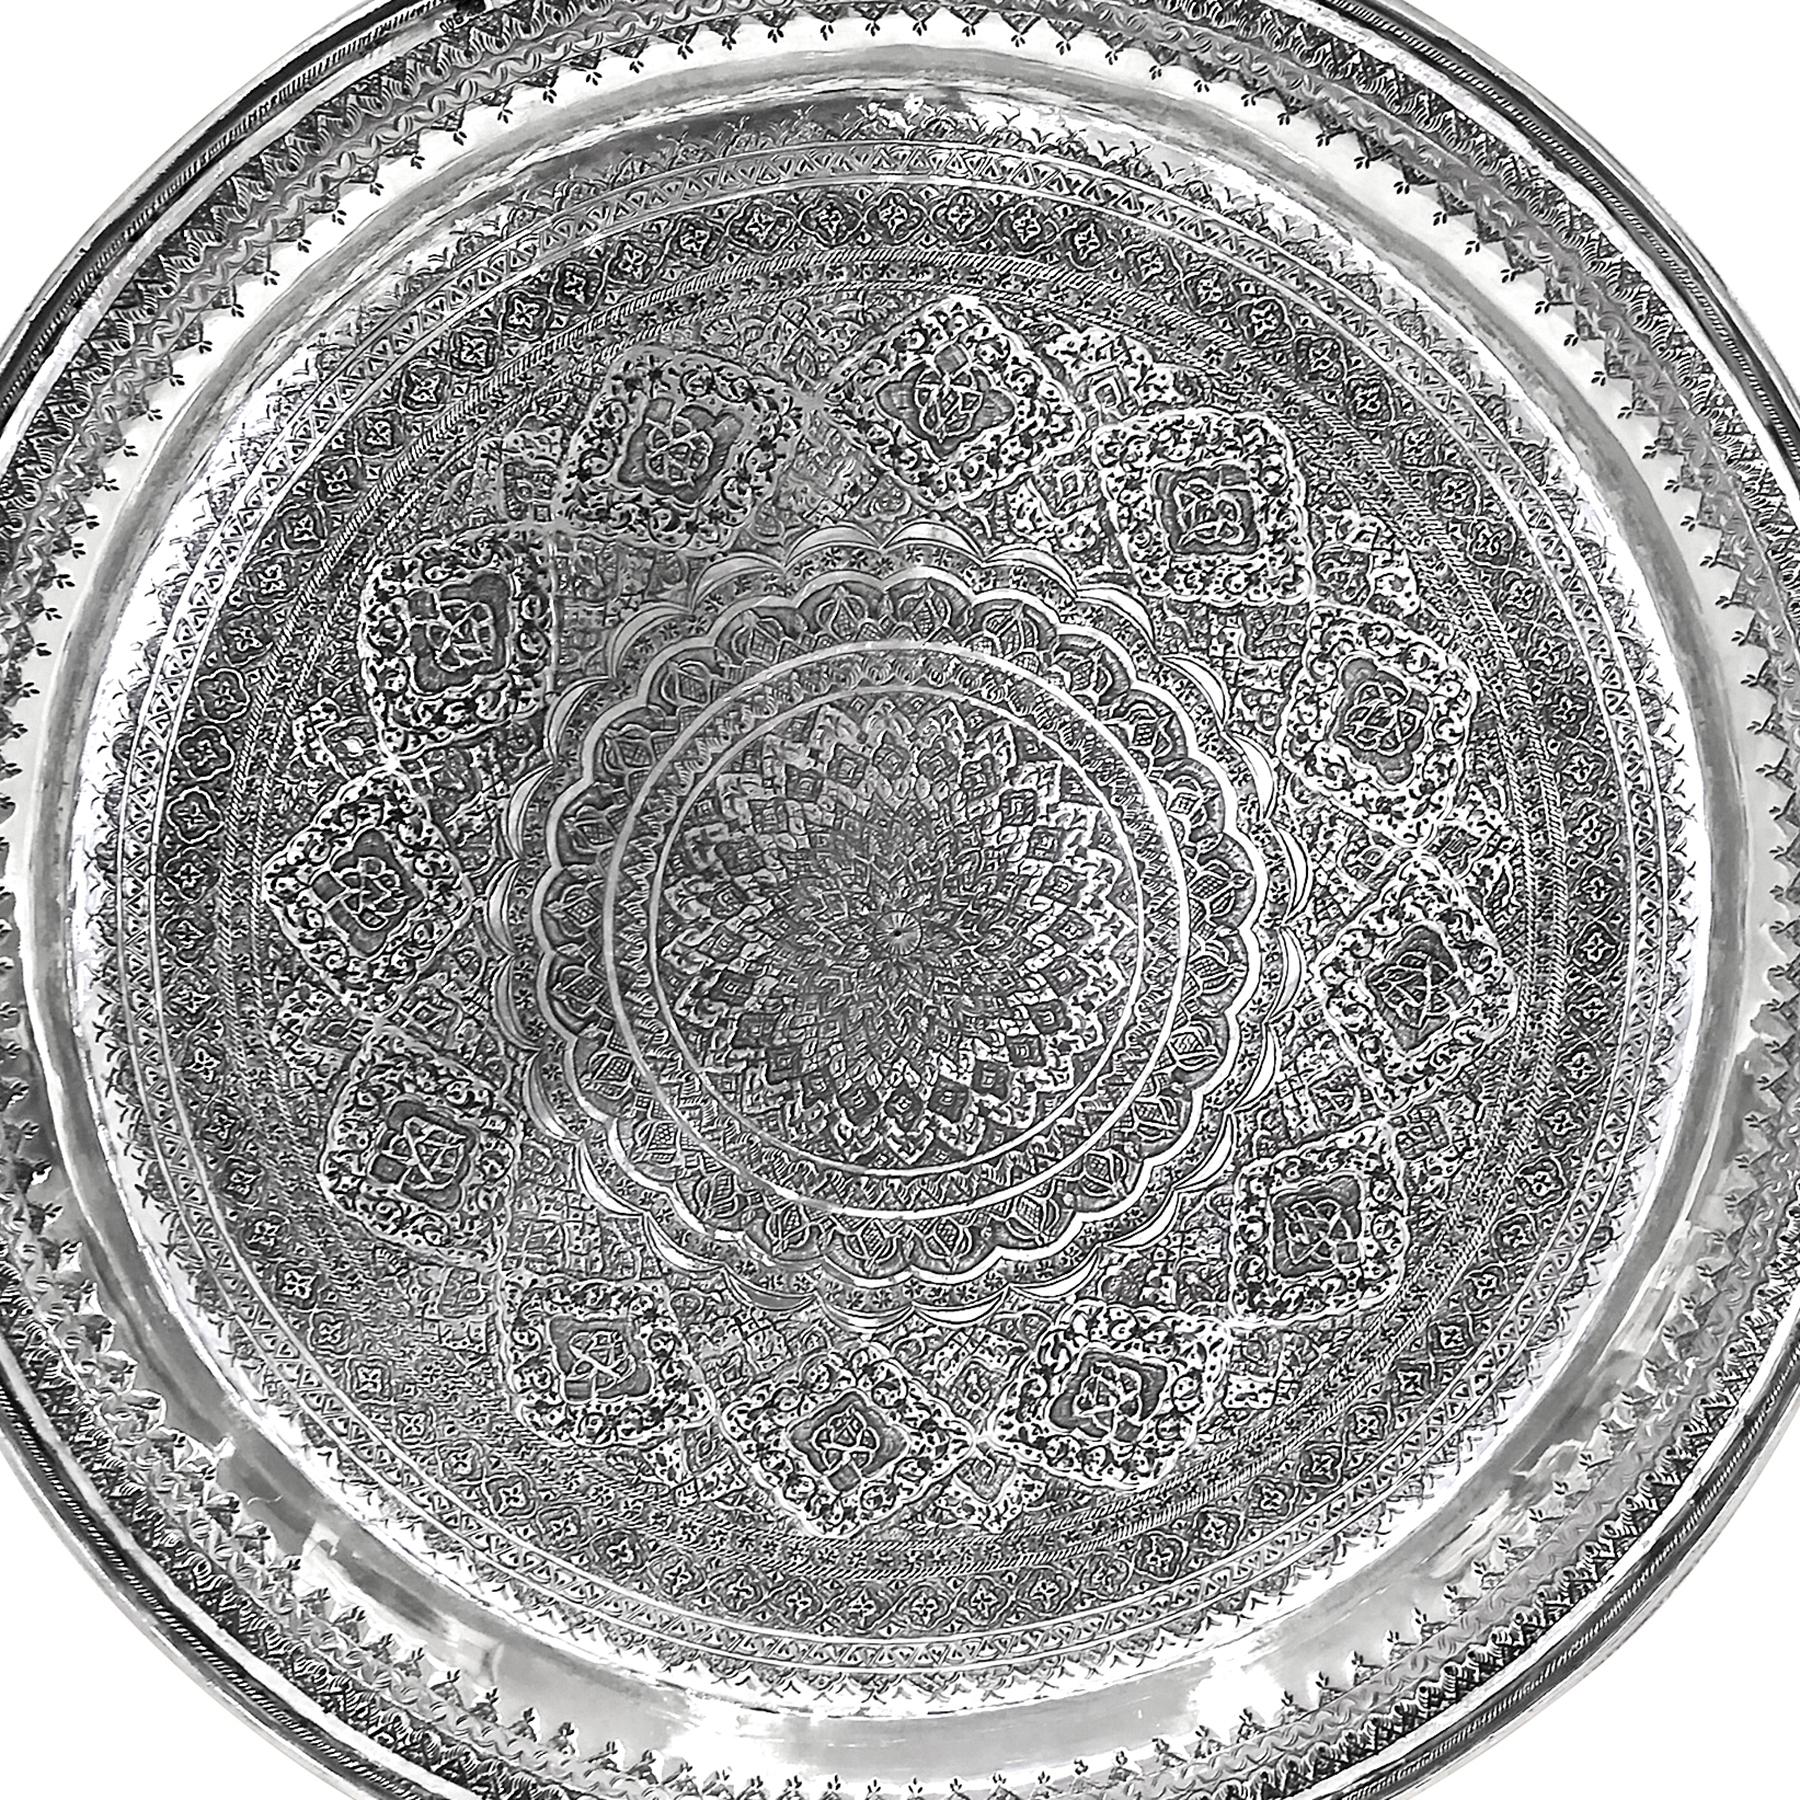 Old round silver tray. 
.900 karat silver. Very detailed and delicate hand carved. 
Designer: josdani
Weight: 1564 grams
Diameter= 16 inches
